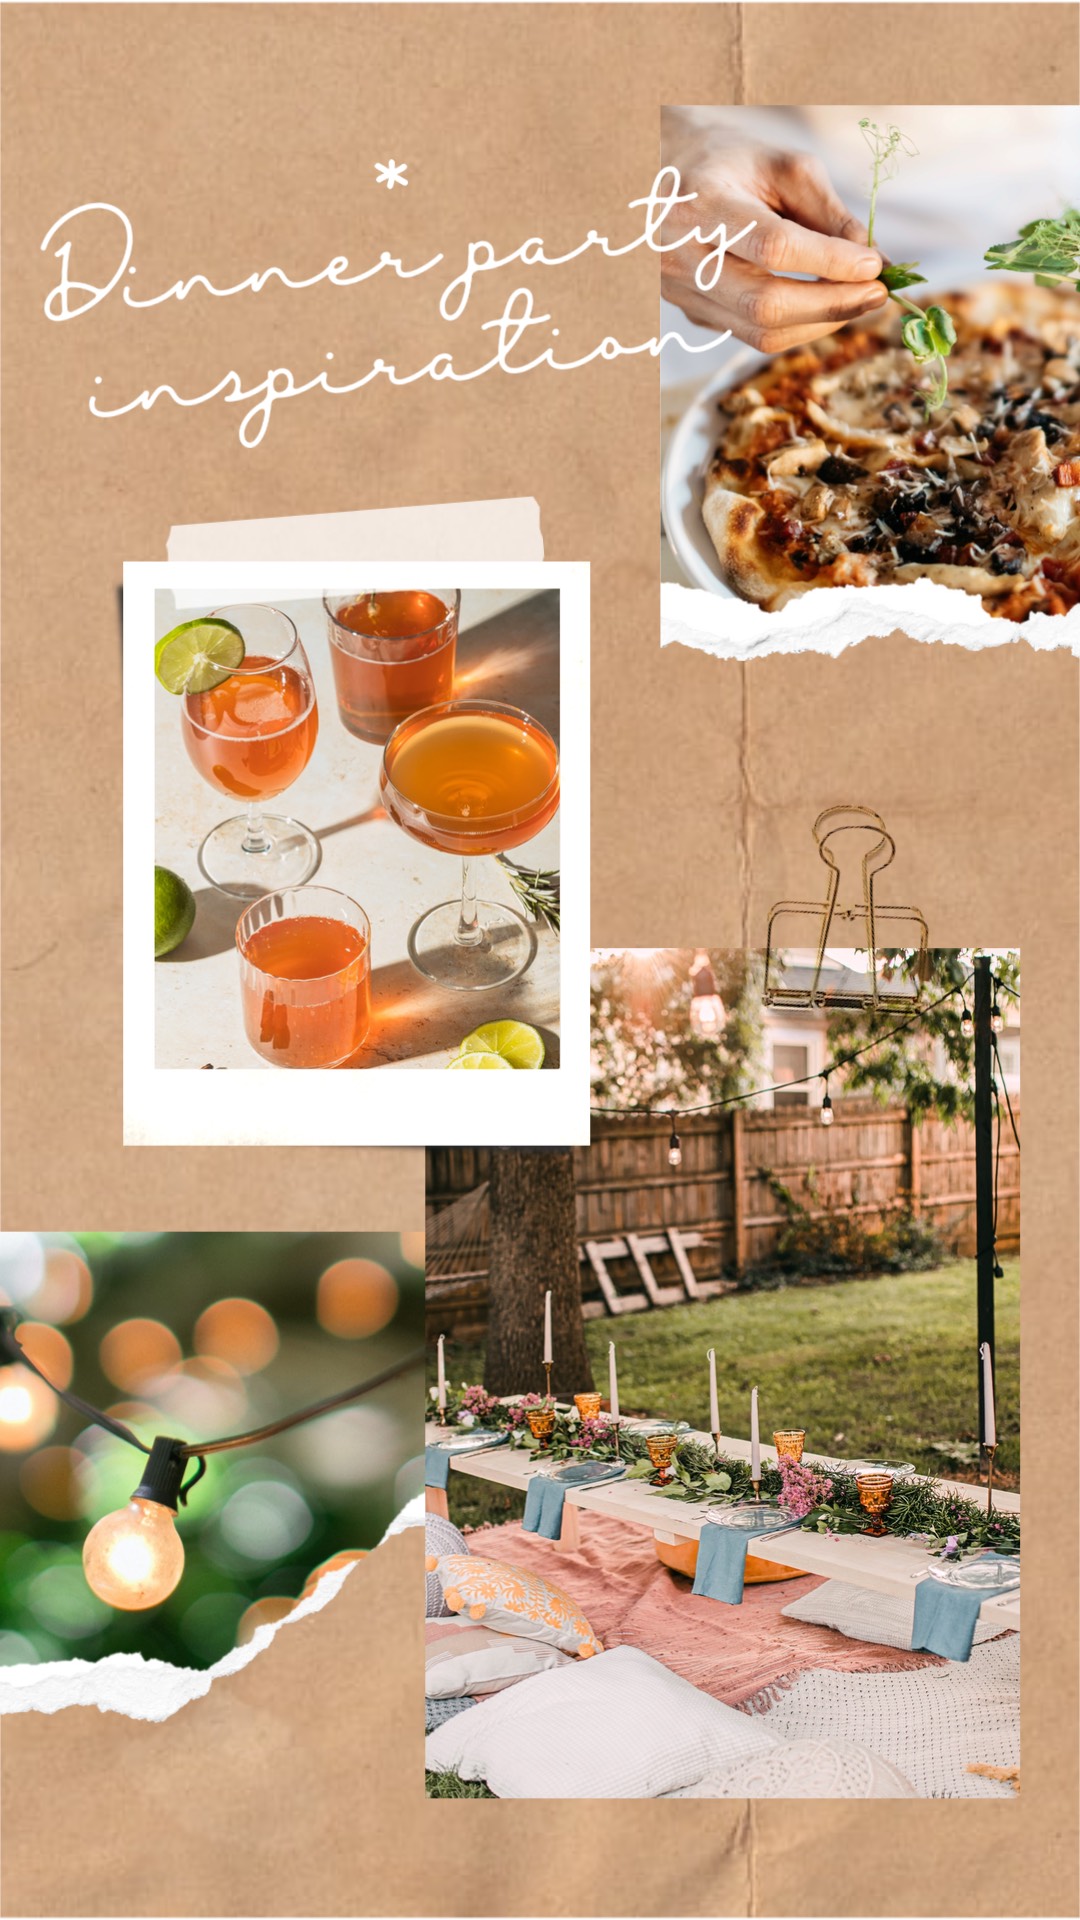 dinner party inspiration moodboard Instagram story template 